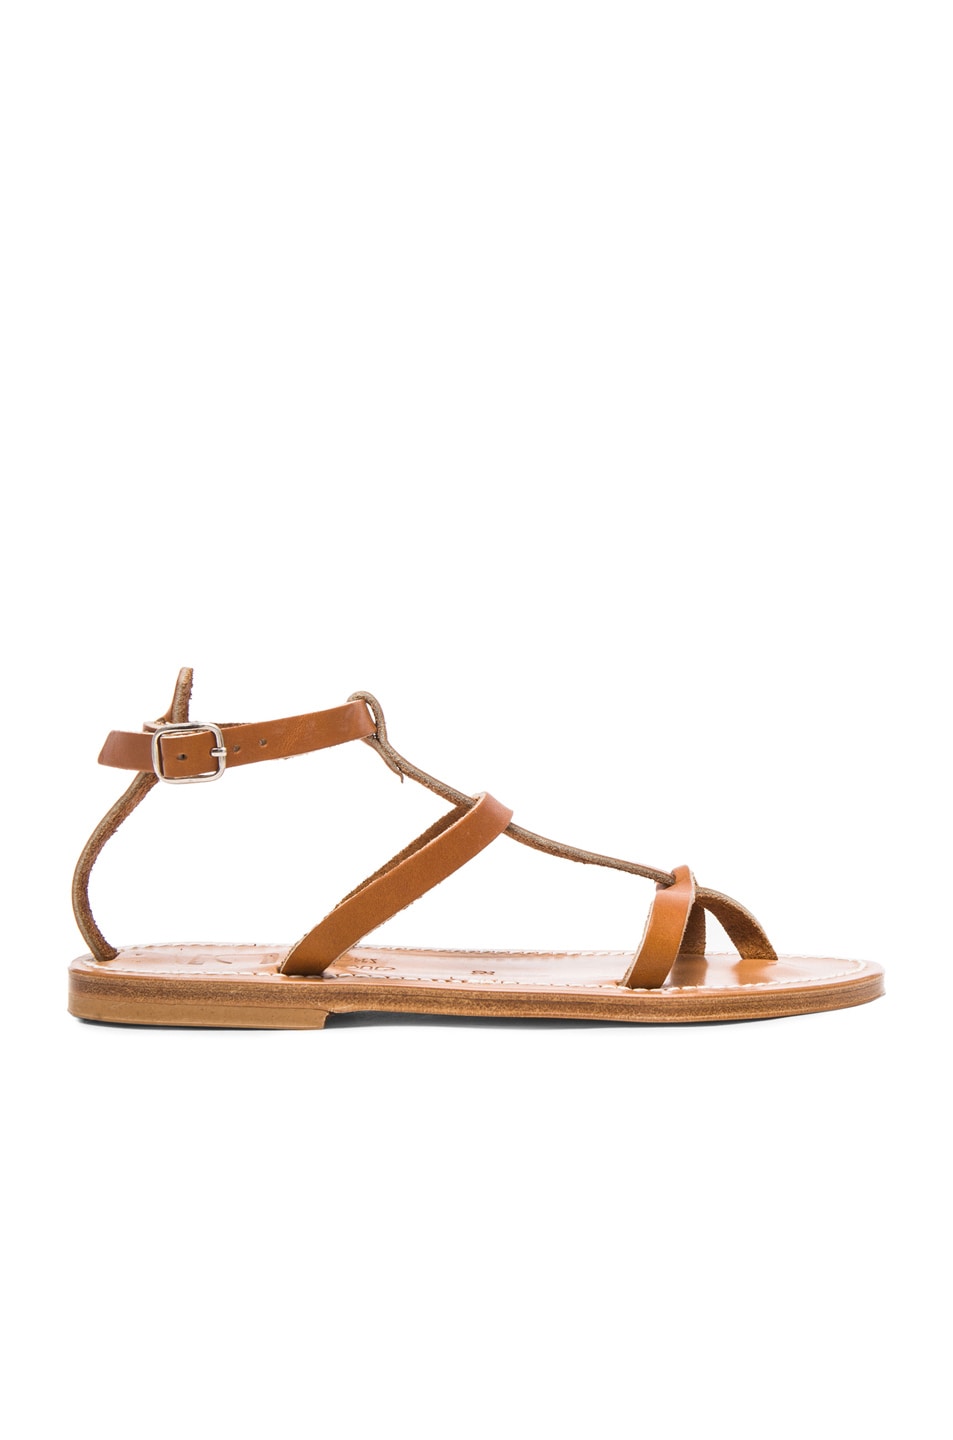 K Jacques Gina Leather Sandals in Natural PUL | FWRD